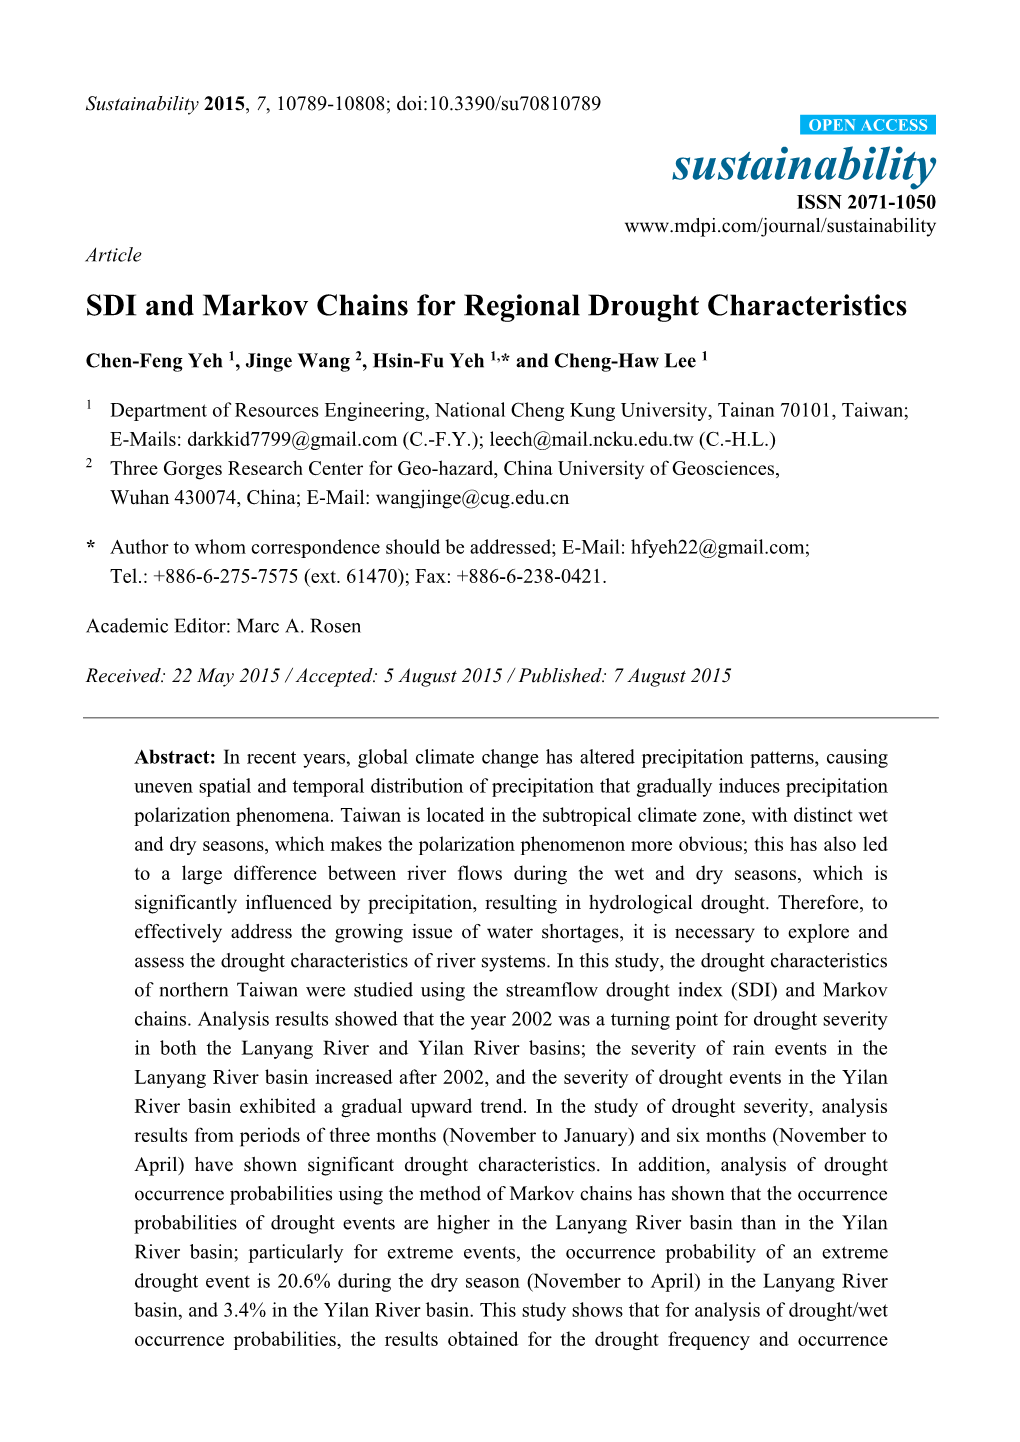 SDI and Markov Chains for Regional Drought Characteristics